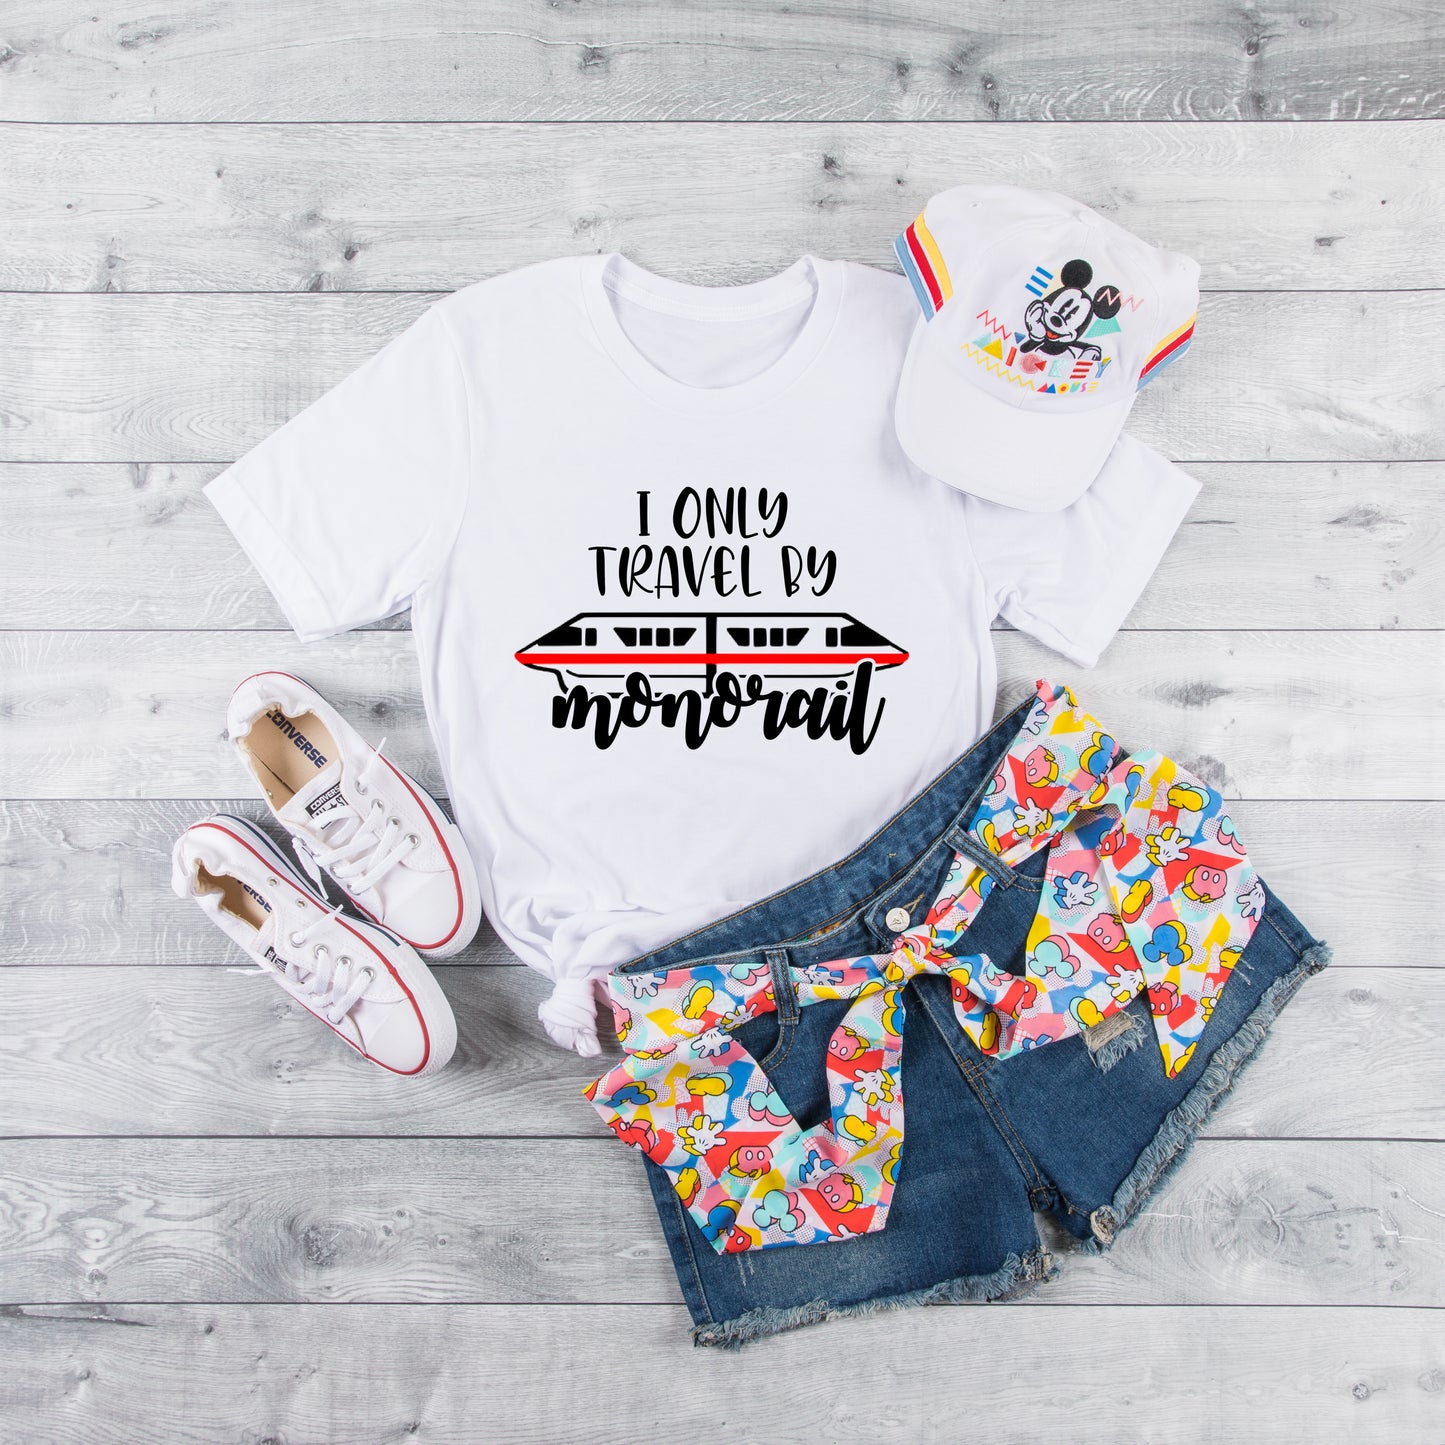 TRAVEL BY MONORAIL TEE